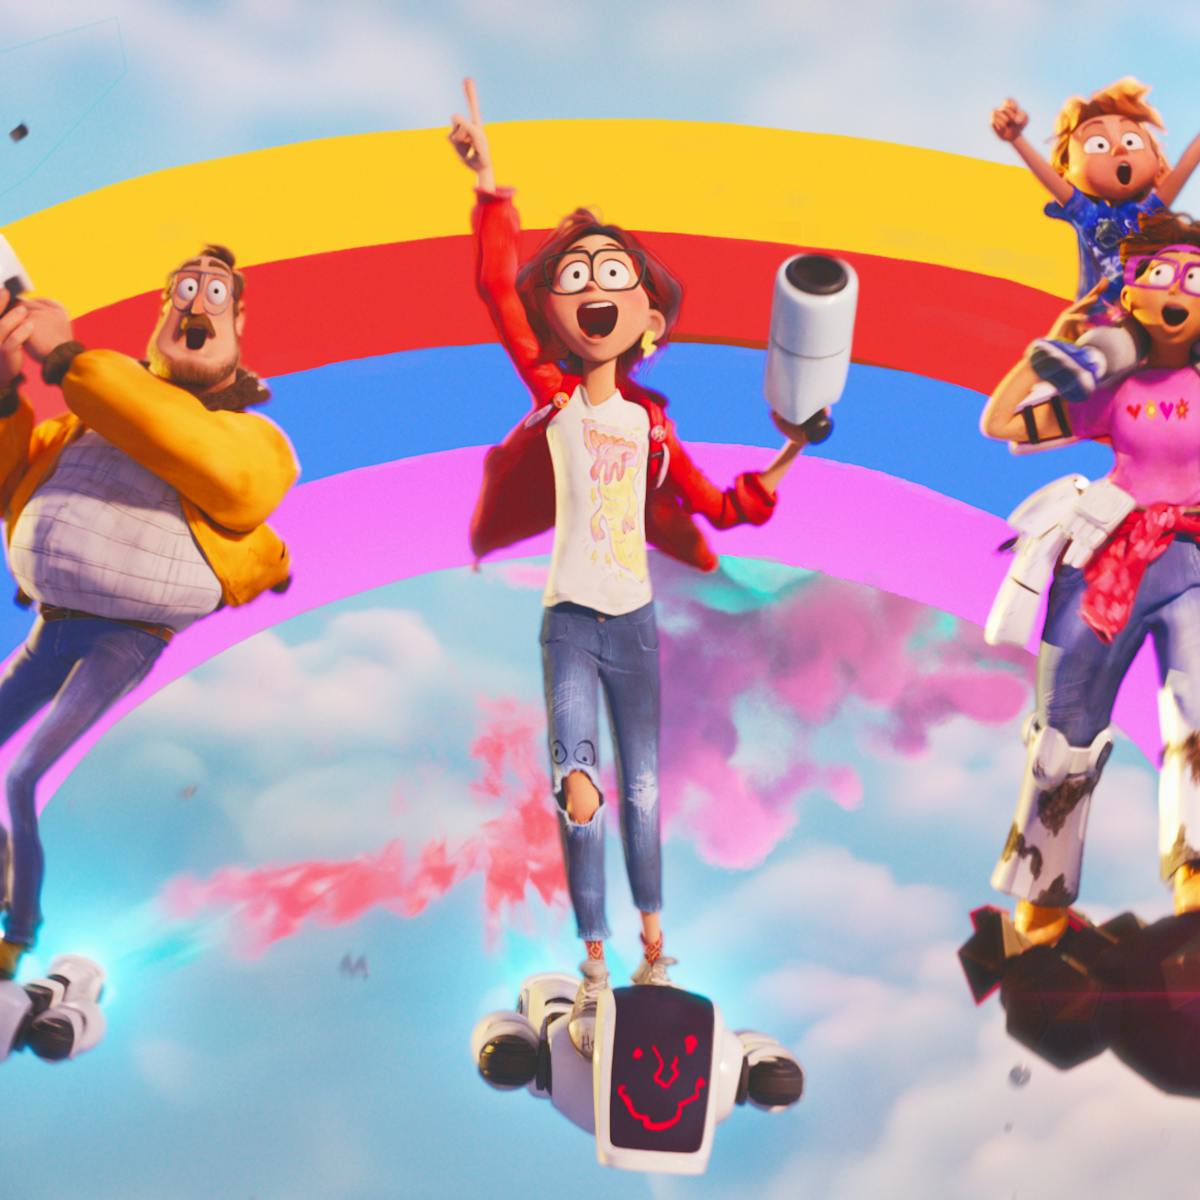 The Mitchells zoom under a rainbow on little robots. Mr. Mitchell wears jeans and a yellow jacket. Katie wears ripped jeans, a white t-shirt, and a red hoodie. Mrs. Mitchell wears a pink t-shirt and massive red glasses. 